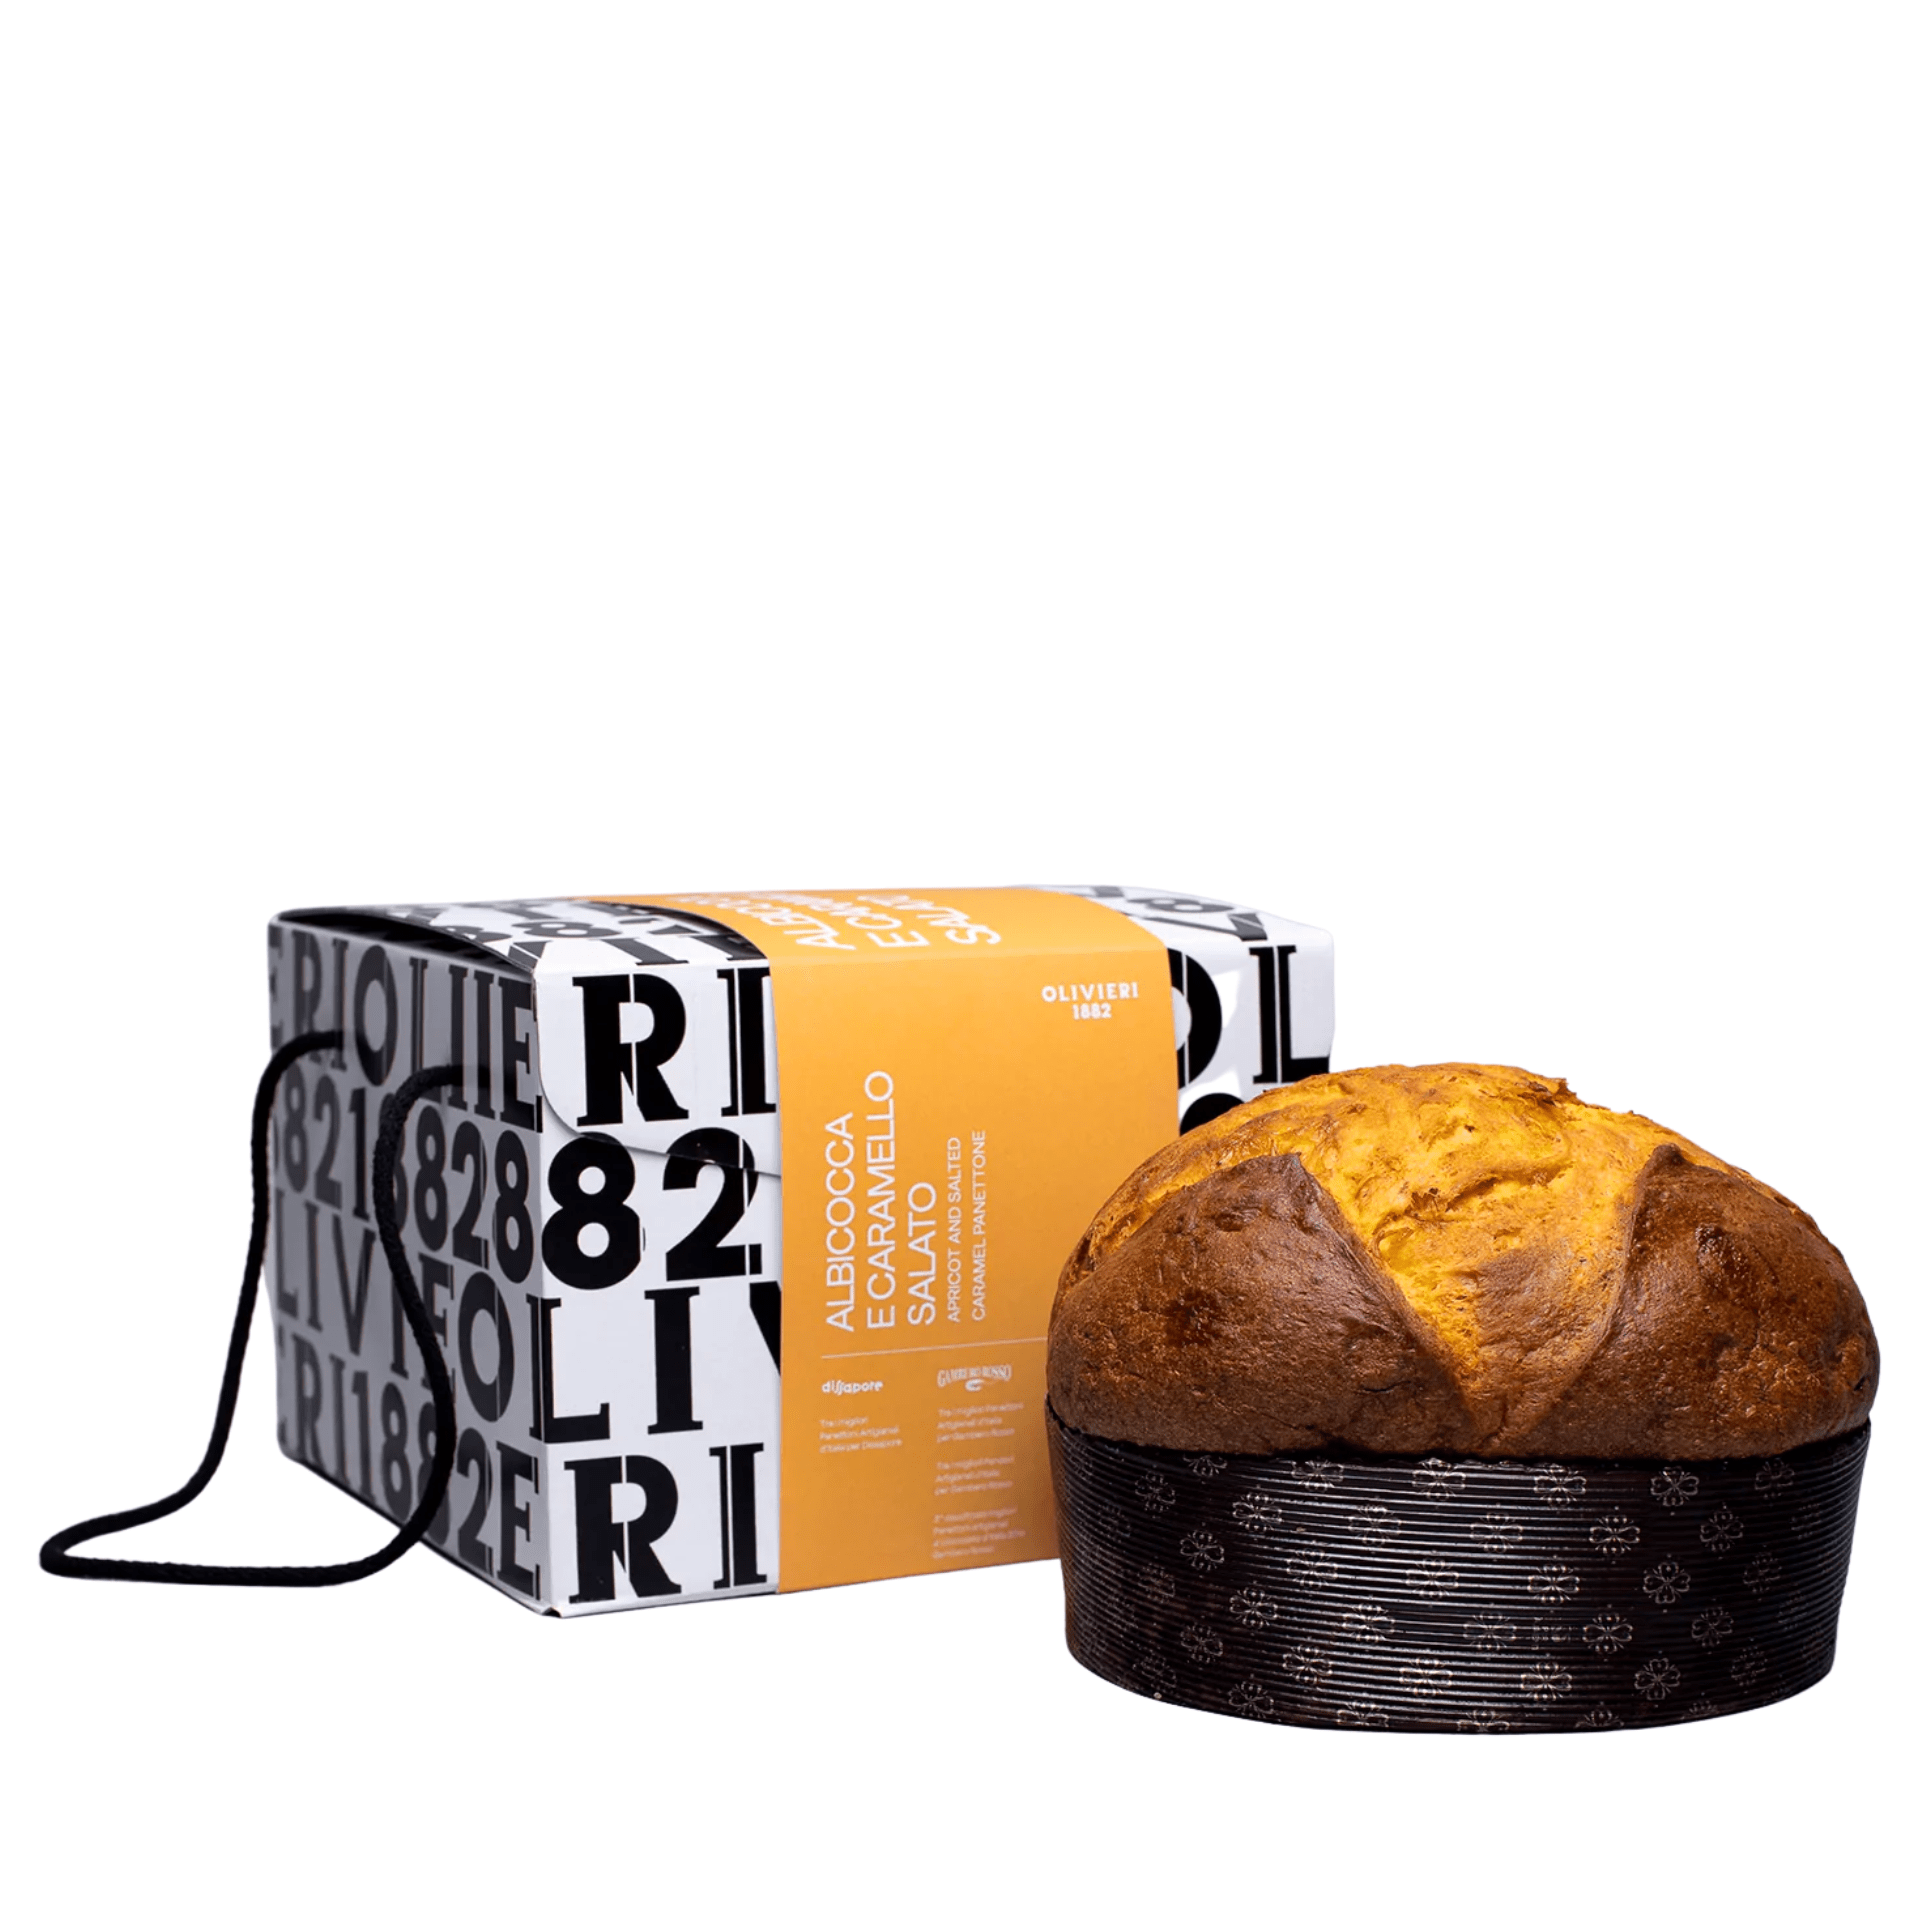 Tasty Ribbon Apricot and Salted Caramel Panettone Apricot and Salted Caramel Panettone | Tasty Ribbon | Holiday Gifts